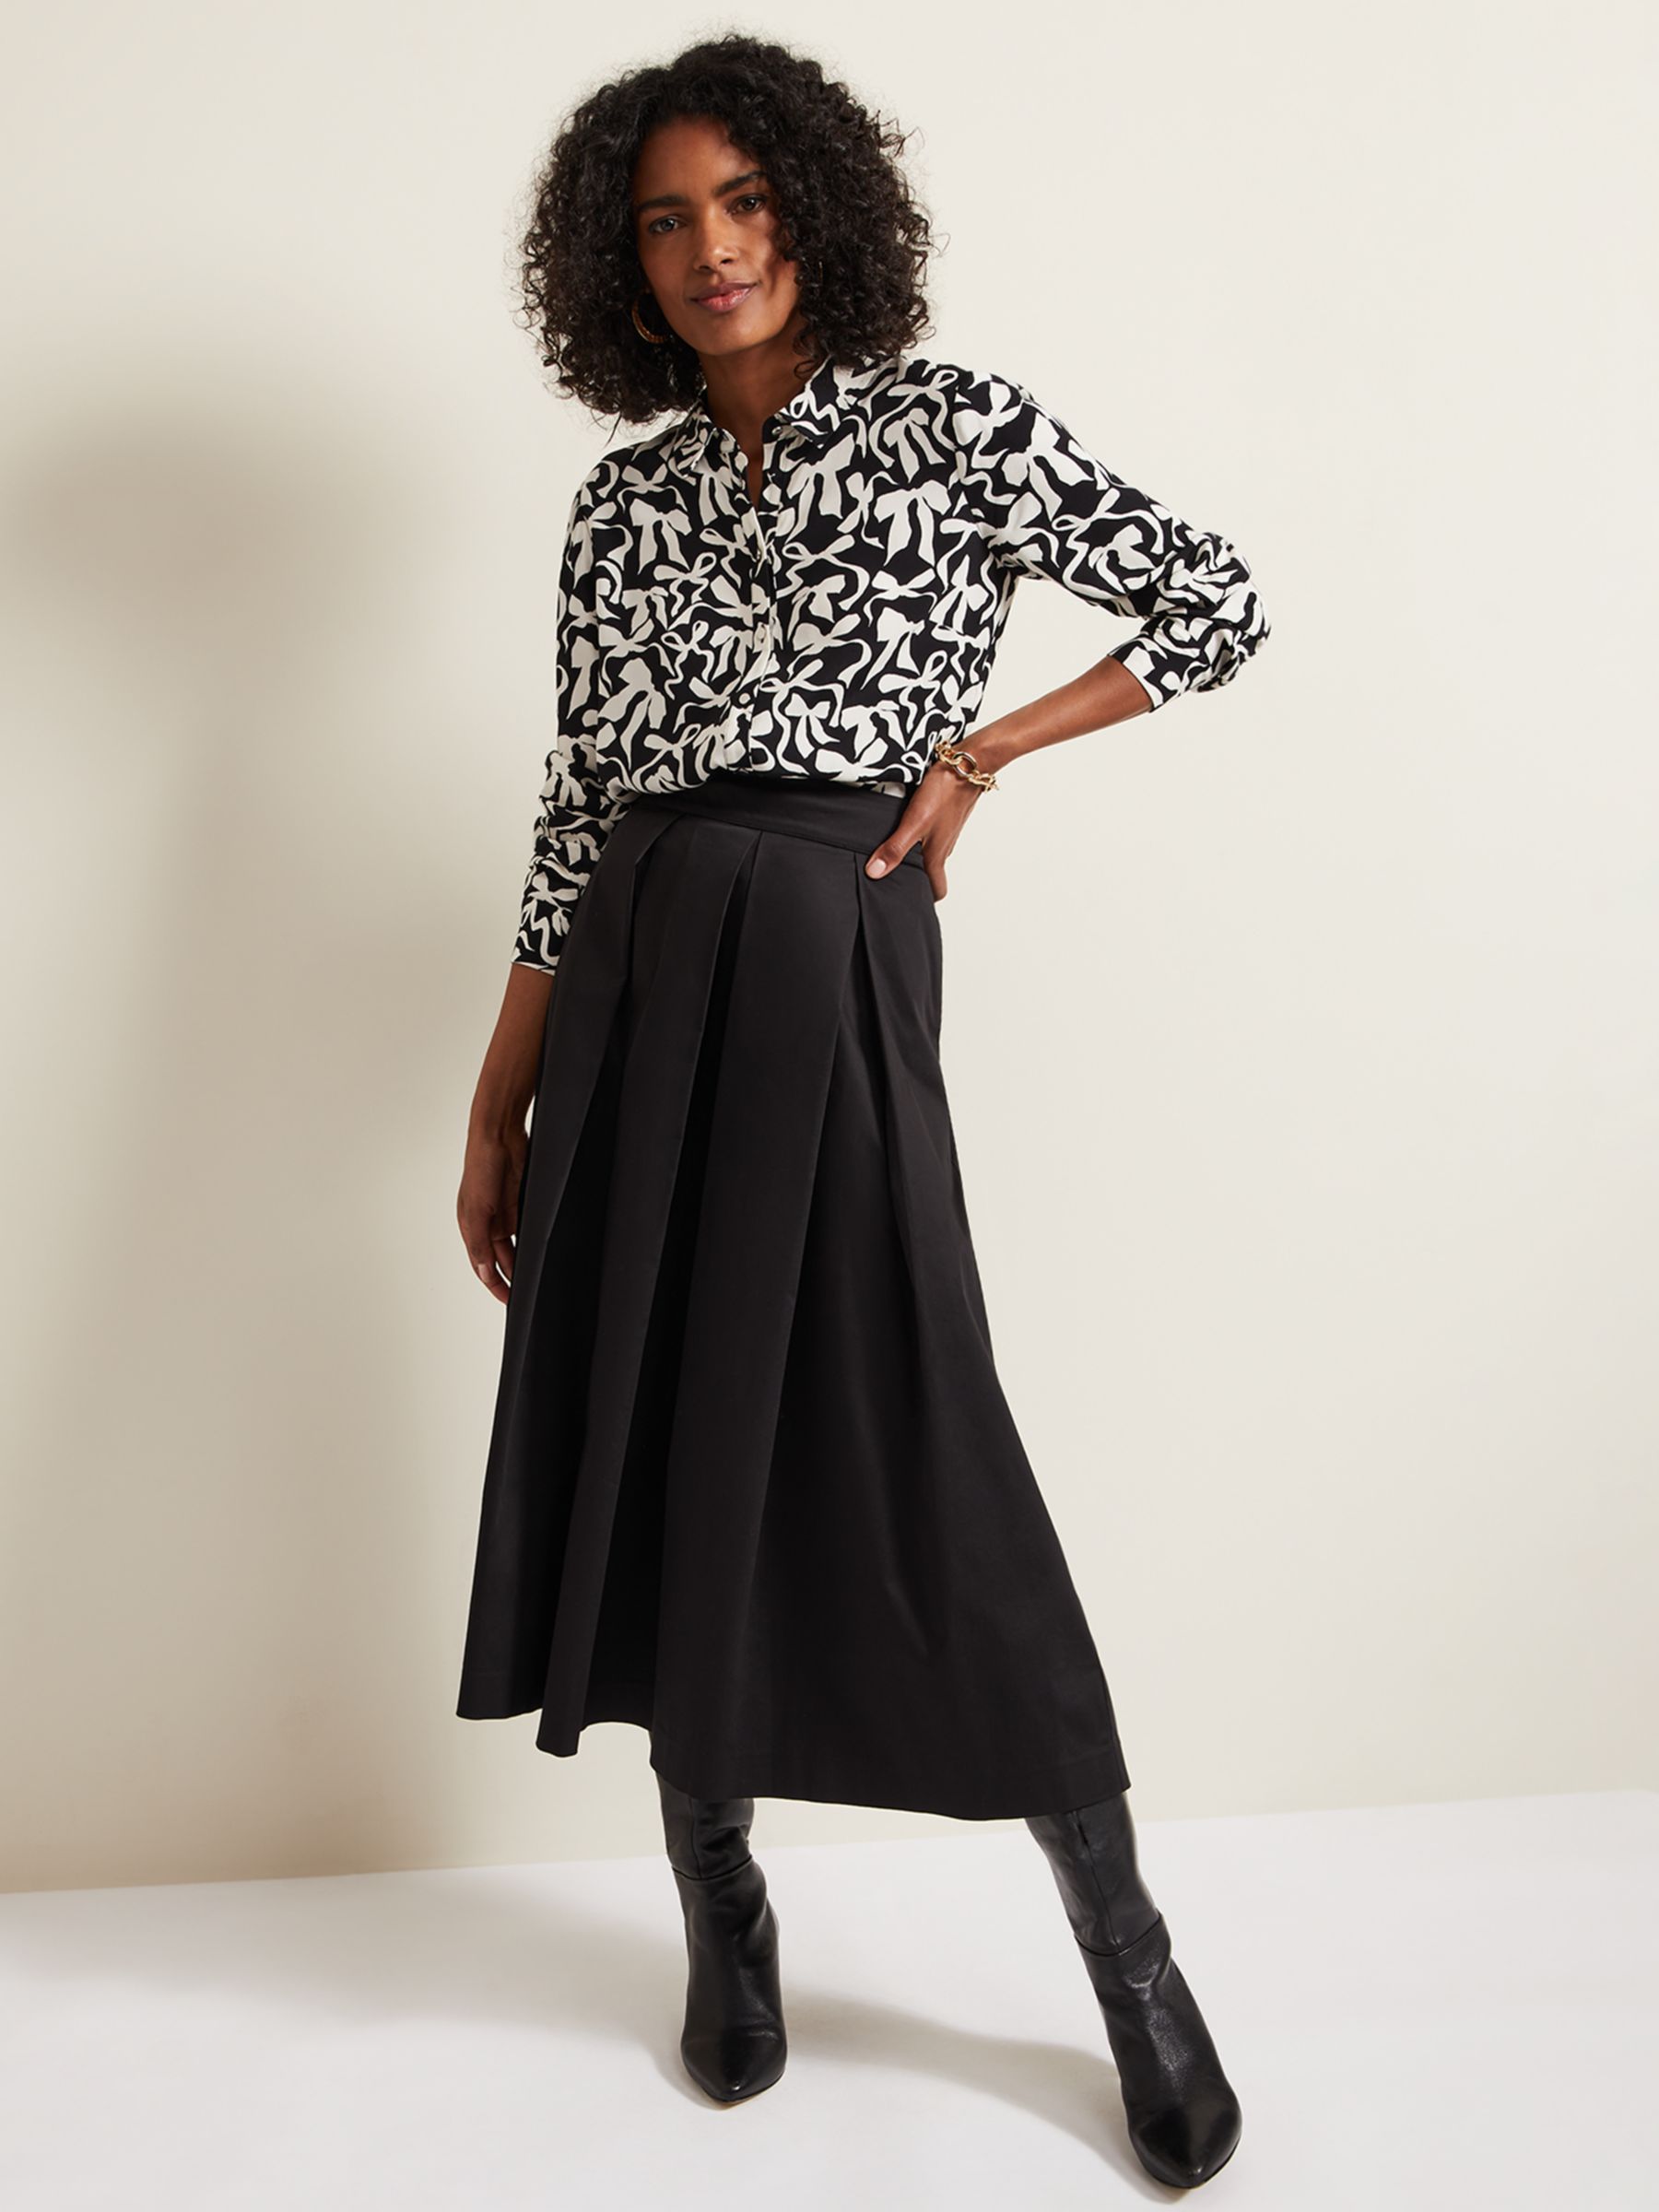 Buy Phase Eight Era Abstract Monochrome Bow Print Shirt, Black/Ivory Online at johnlewis.com